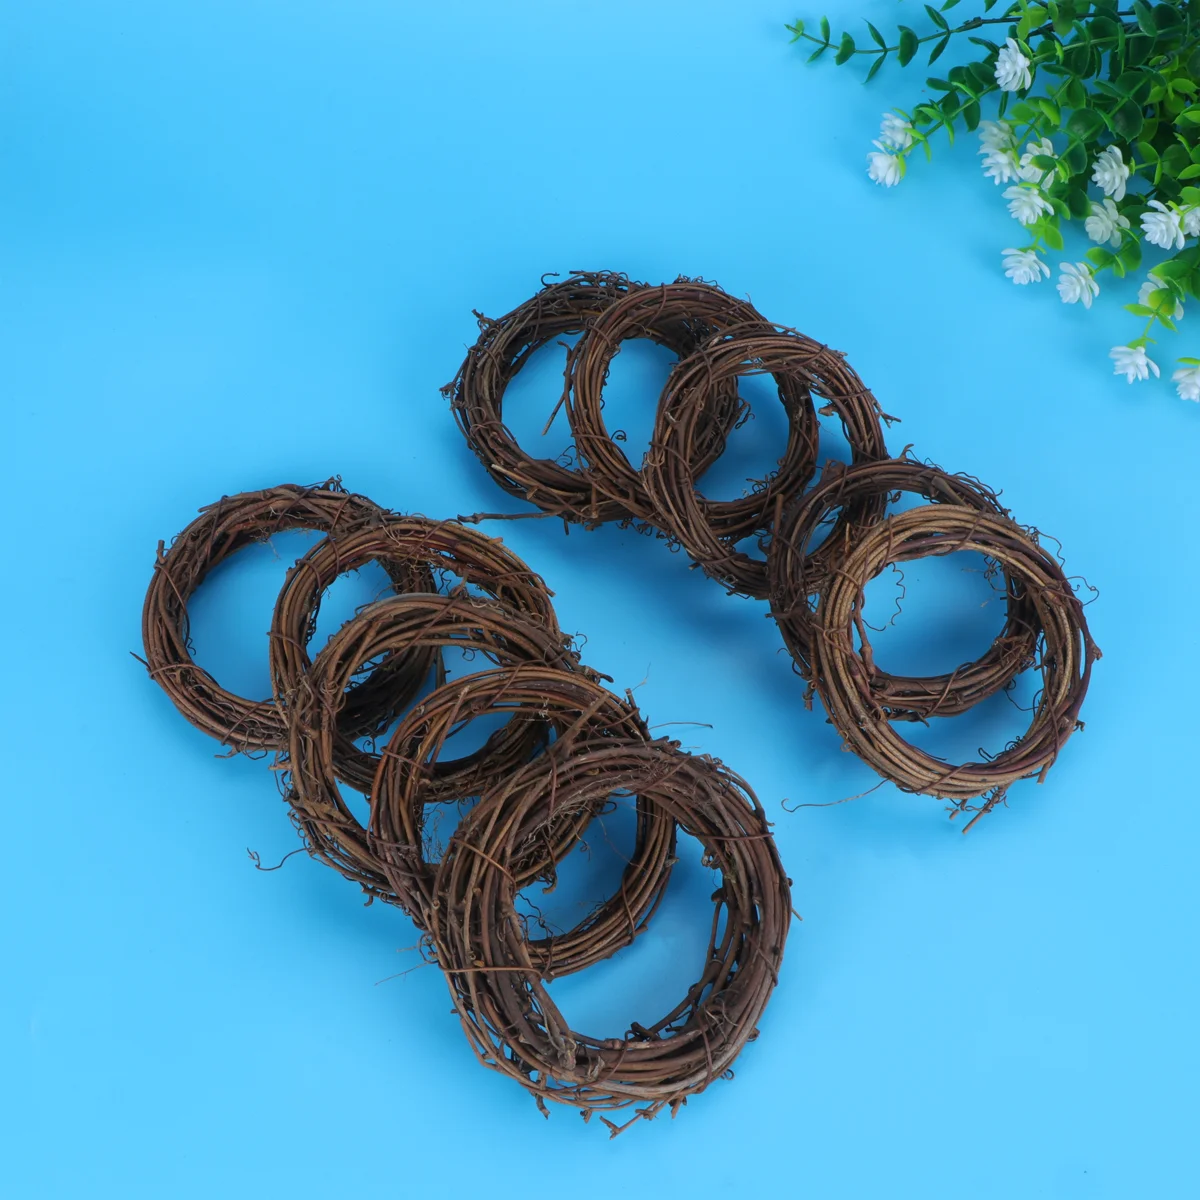 

Wreath Rattan Ring Garland Grapevine Vine Natural Christmas Twig Diy Wreaths Branch Rings Wooden Dried Hanging Crafts Party